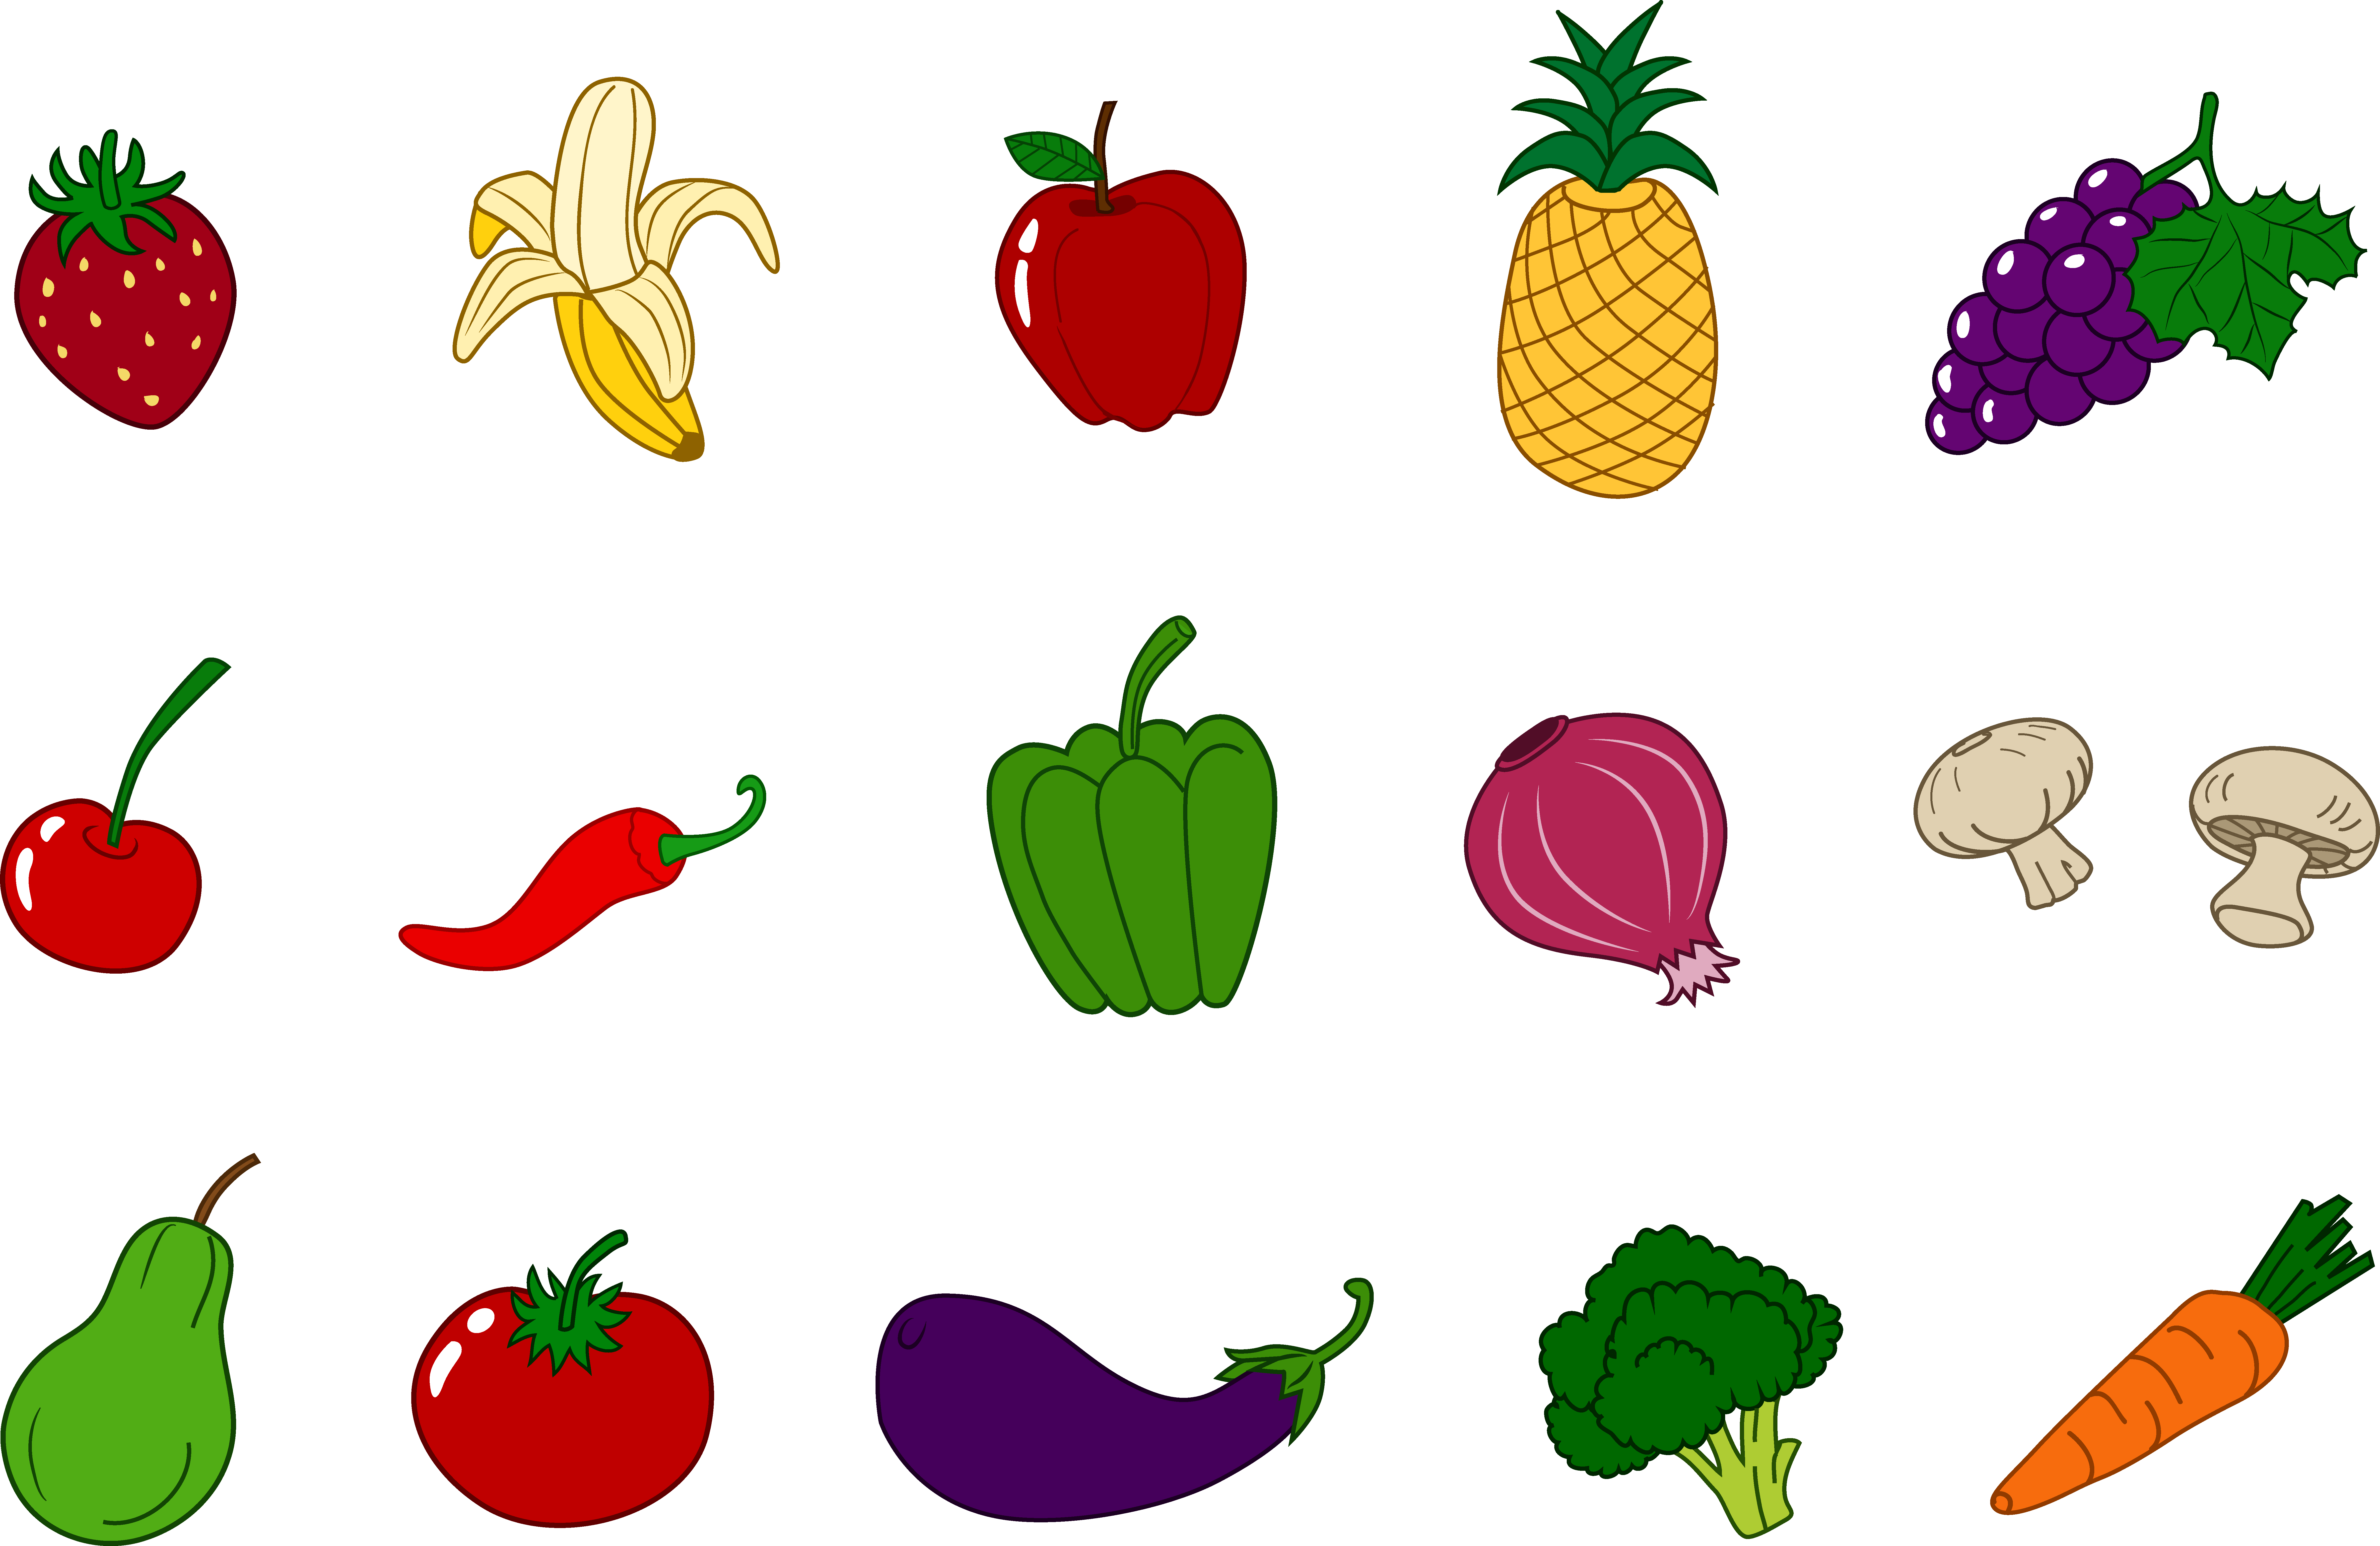 Fruits And Vegetables Clipart u0026amp; Fruits And Vegetables Clip Art Images - ClipartALL clipartall.com